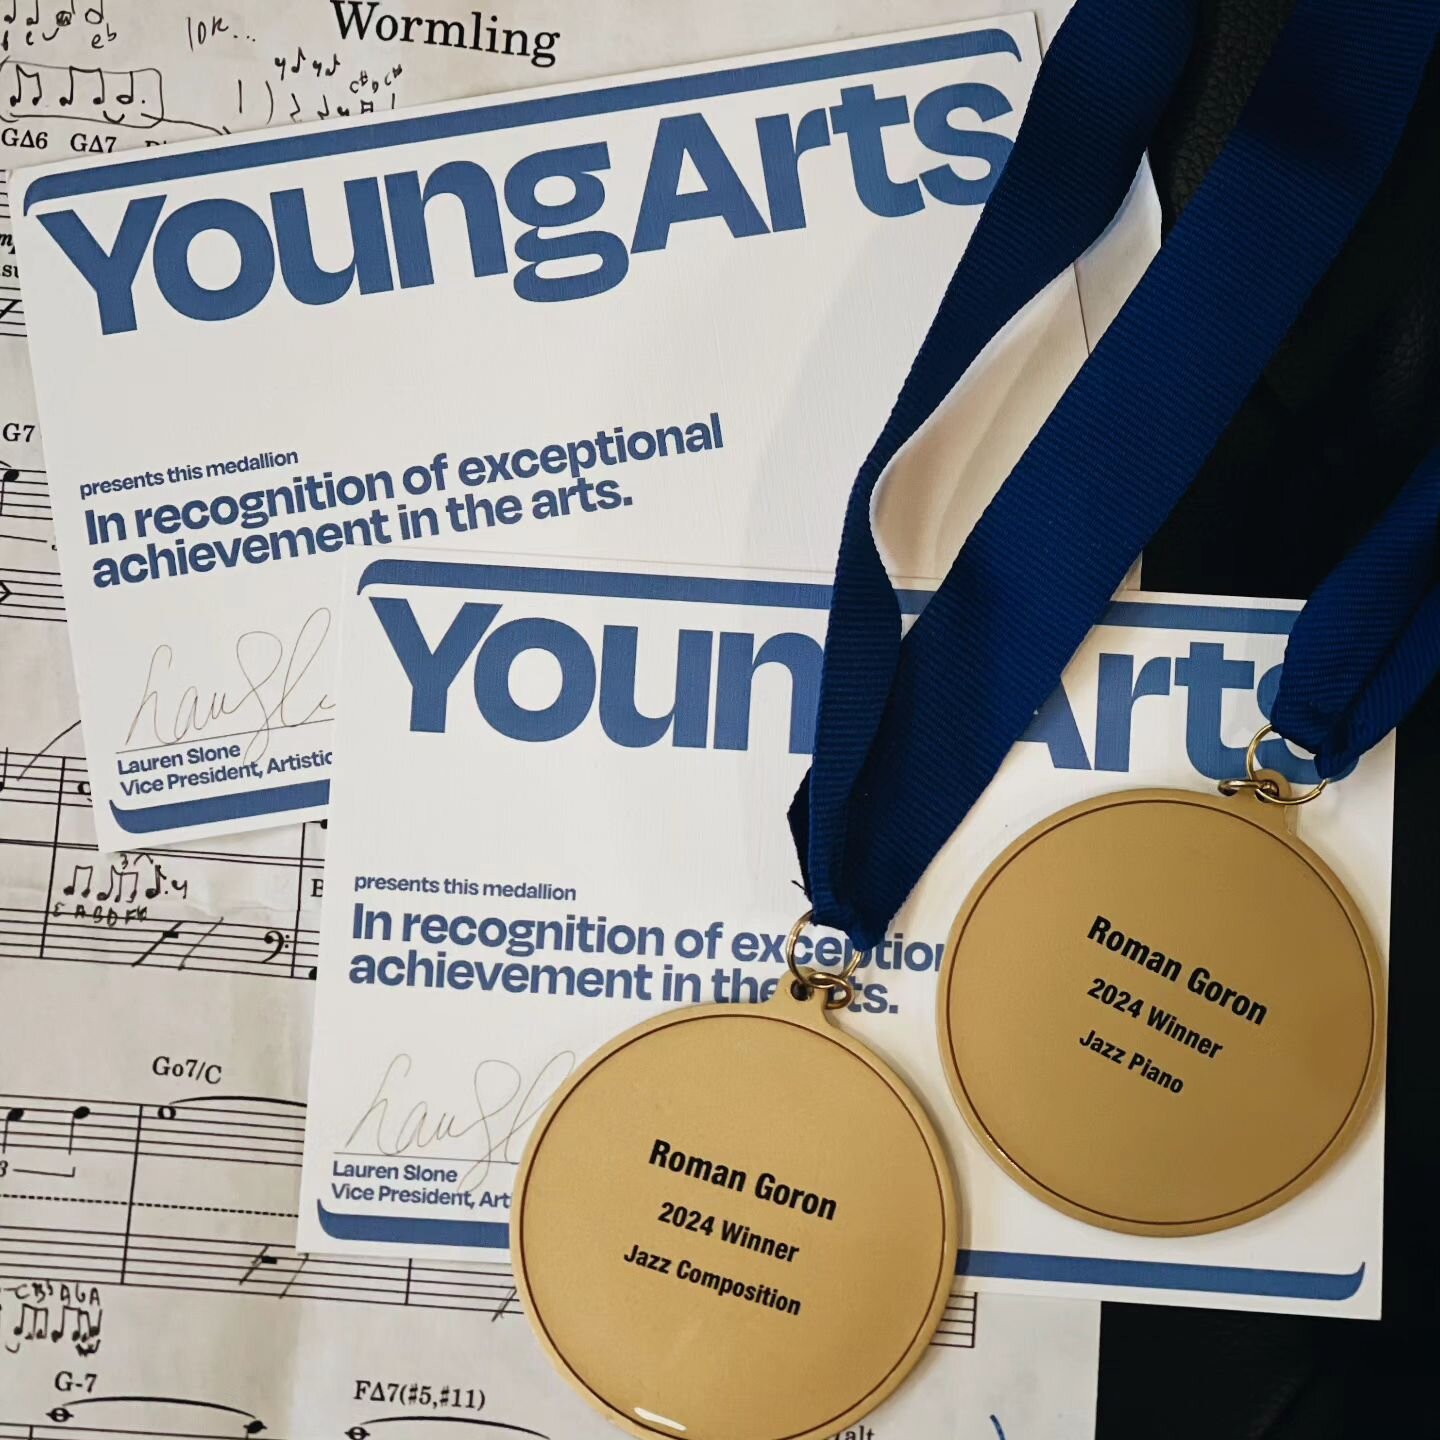 Hello everyone! I'm super grateful to have been recognized by @youngarts in the Jazz Composition and Jazz Piano categories for 2024! I'm excited to share some arrangements and compositions I've been working on recently with you soon.